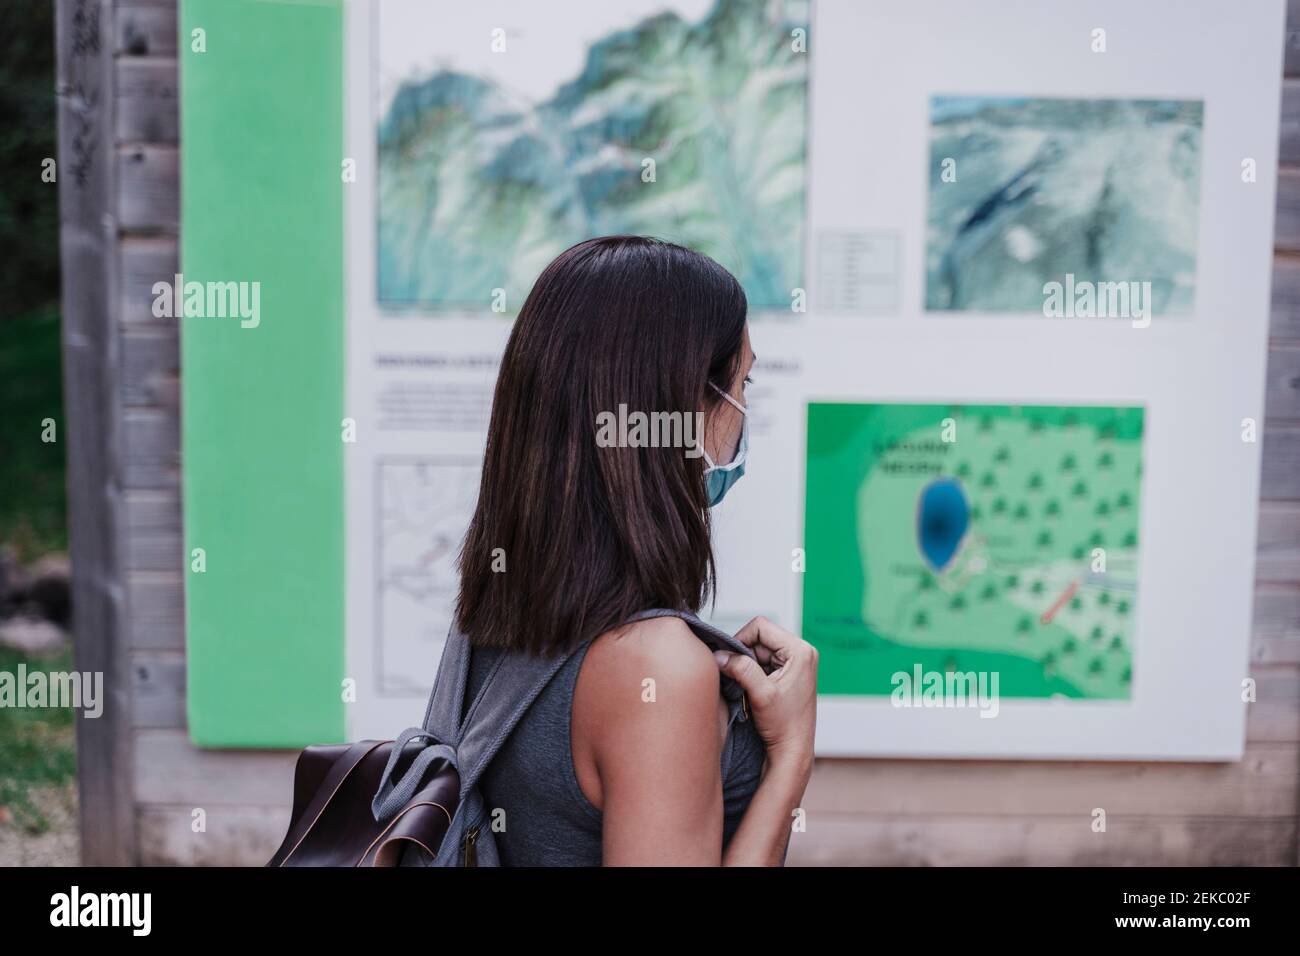 Female hiker wearing face mask looking at map Stock Photo